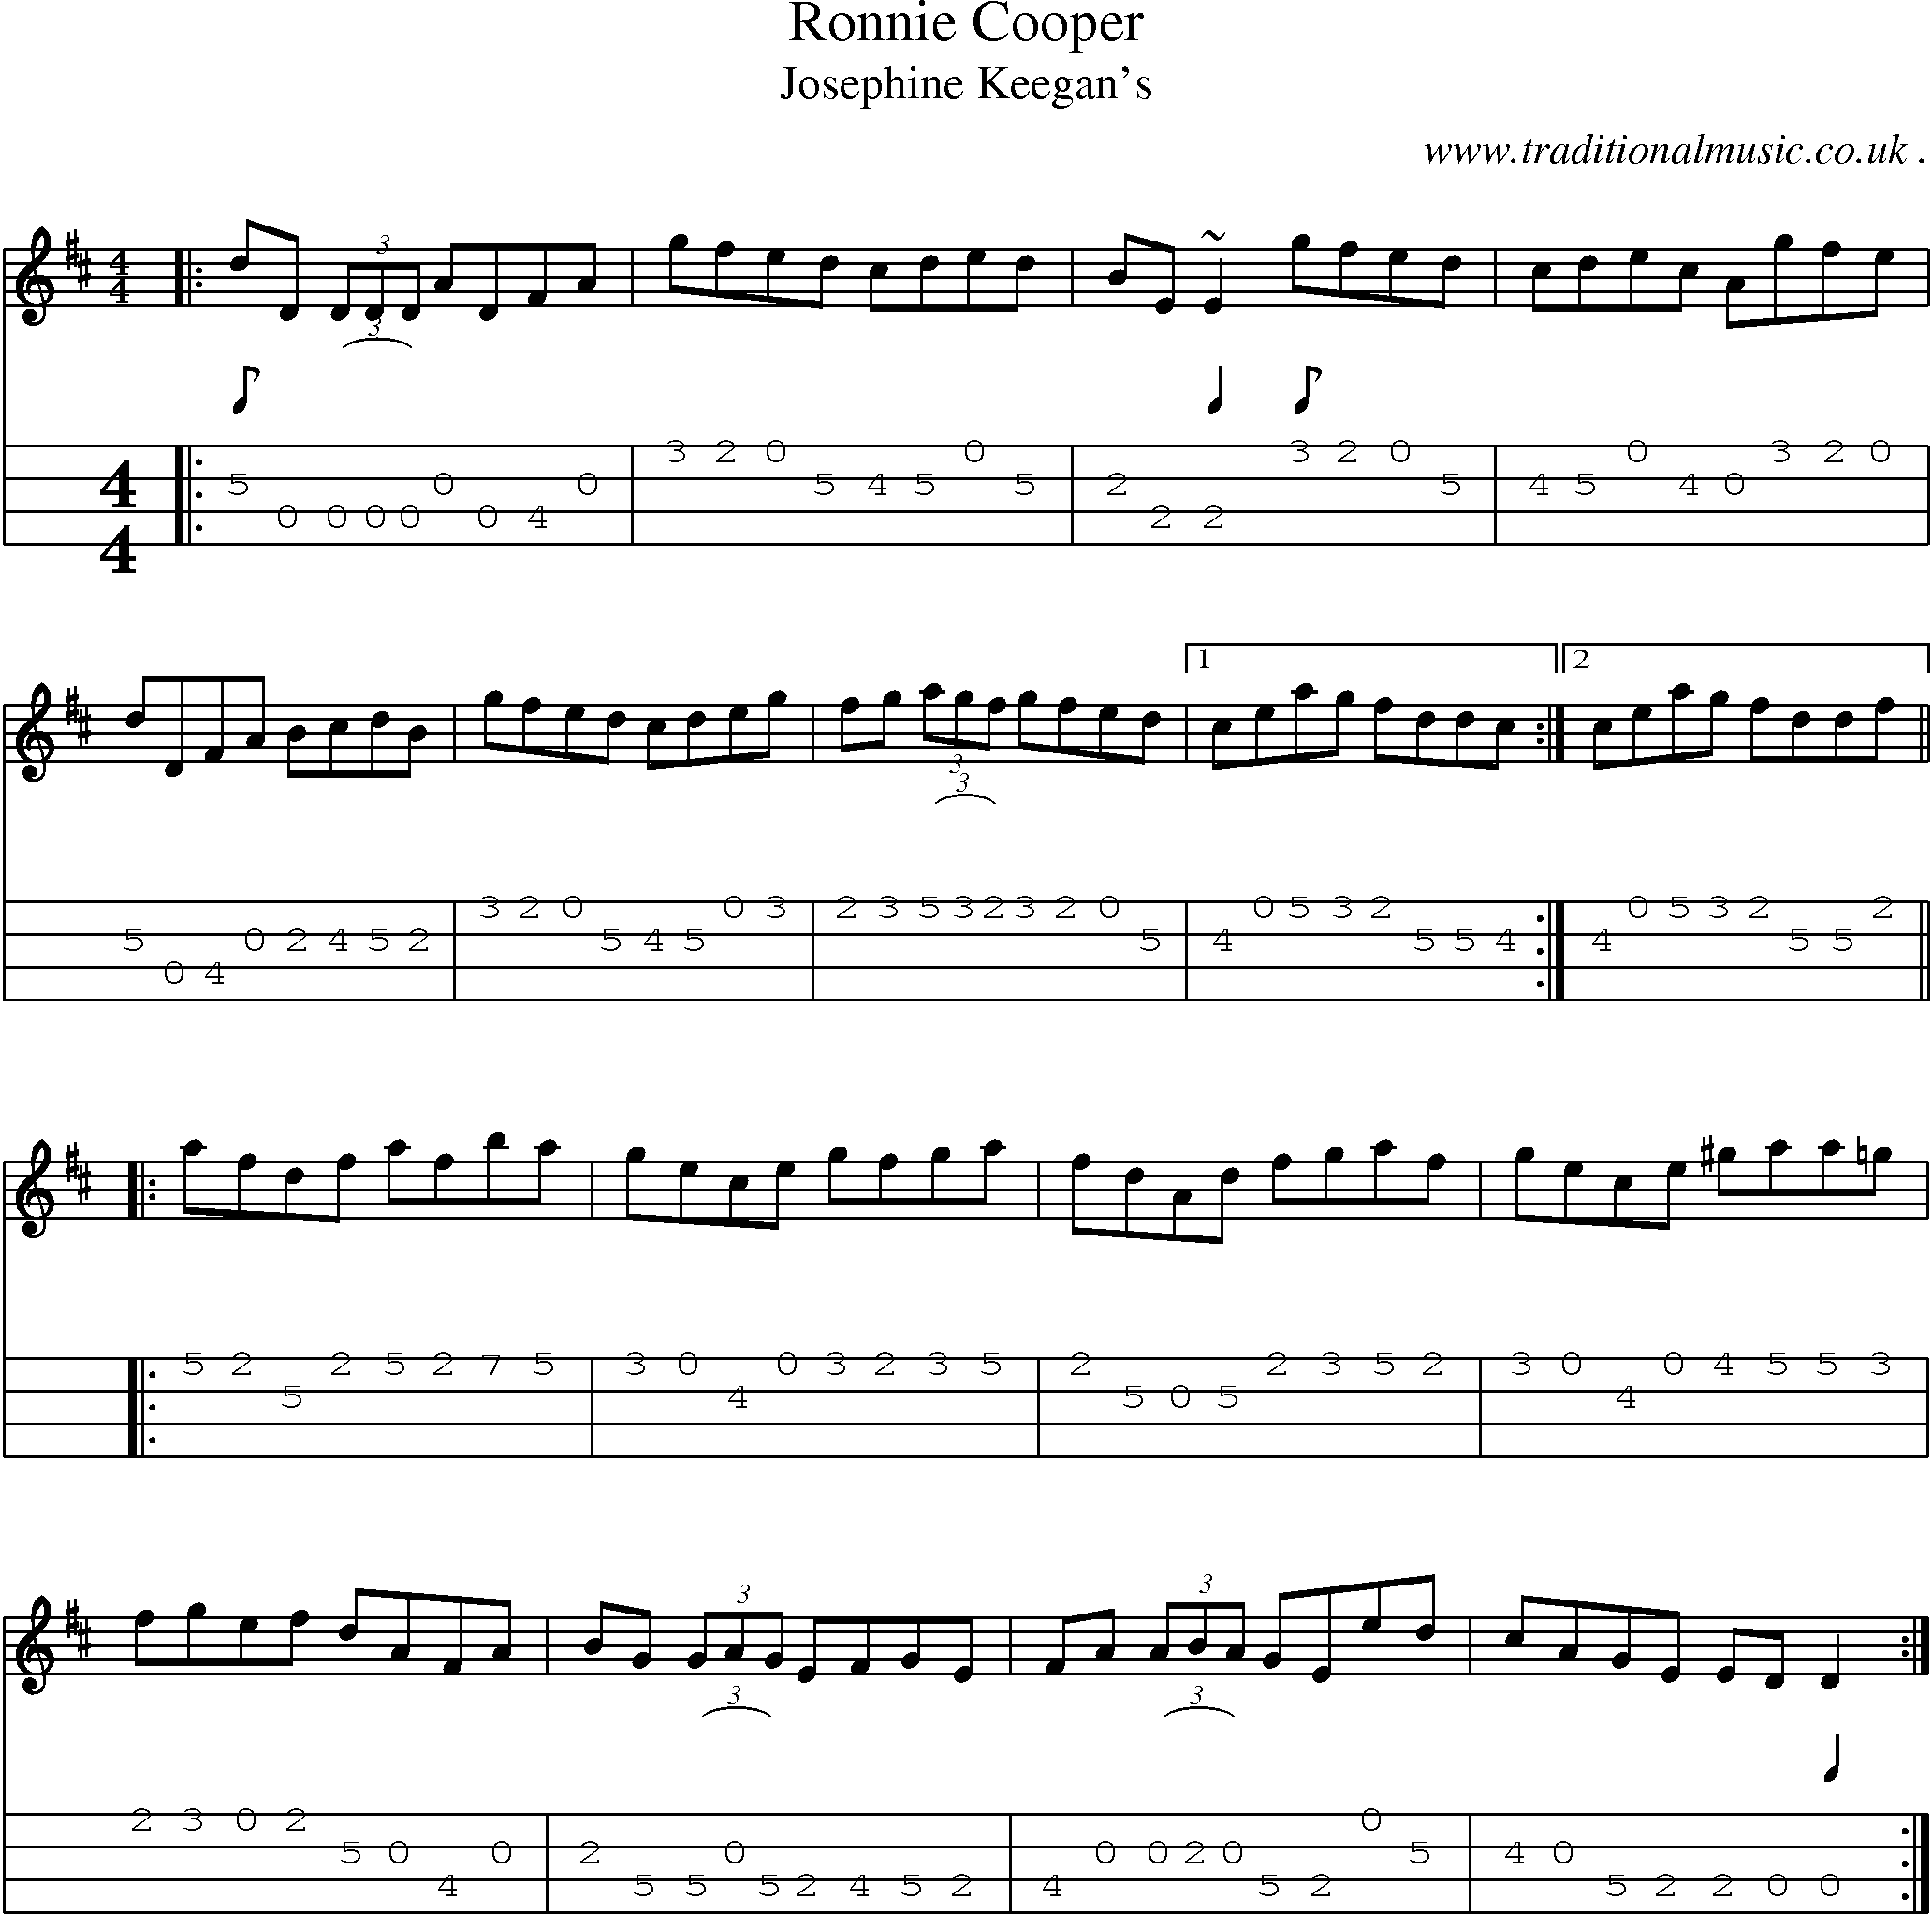 Sheet-music  score, Chords and Mandolin Tabs for Ronnie Cooper